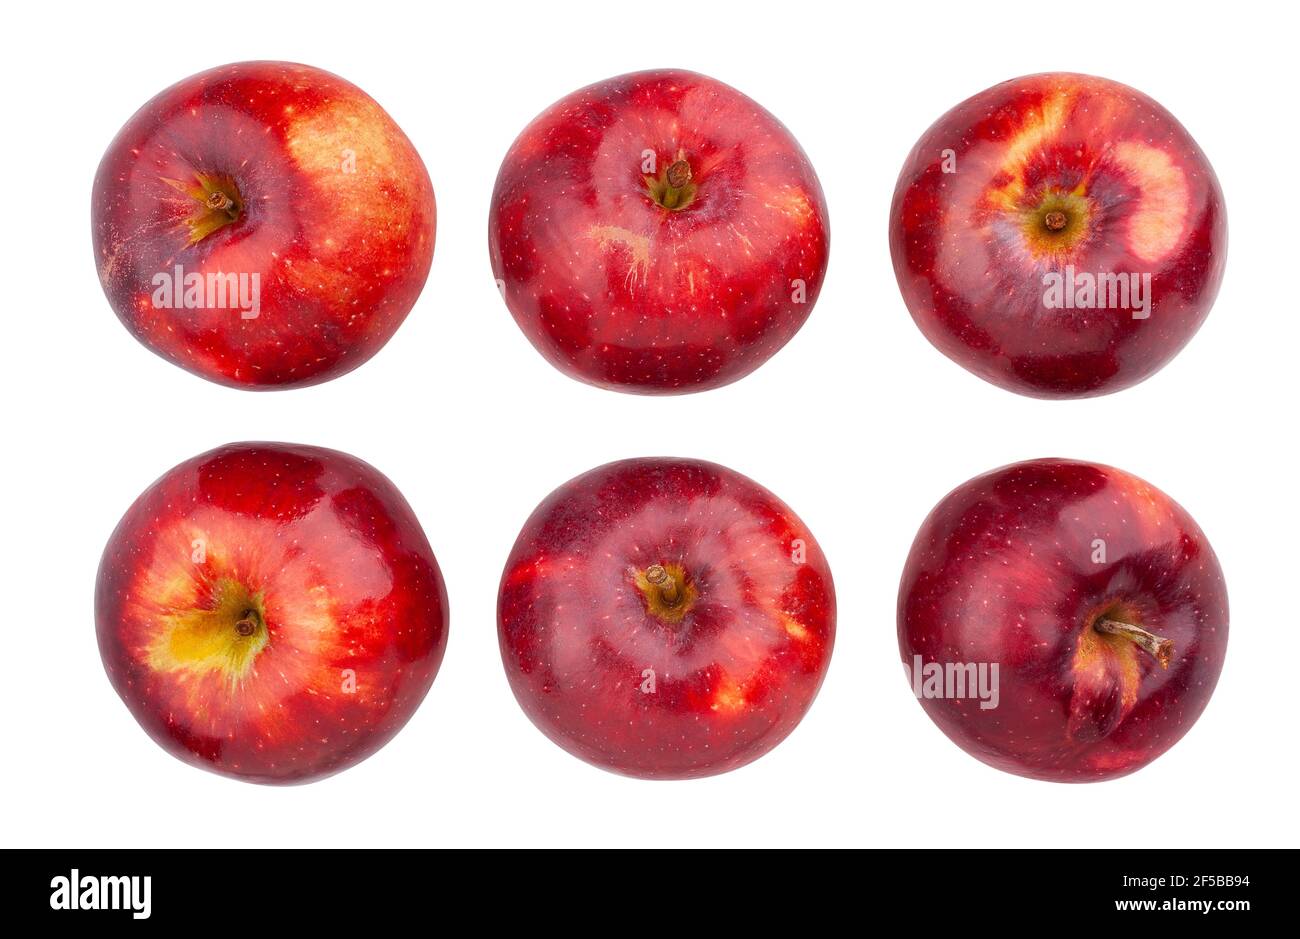 https://c8.alamy.com/comp/2F5BB94/red-apple-path-isolated-on-white-top-view-2F5BB94.jpg